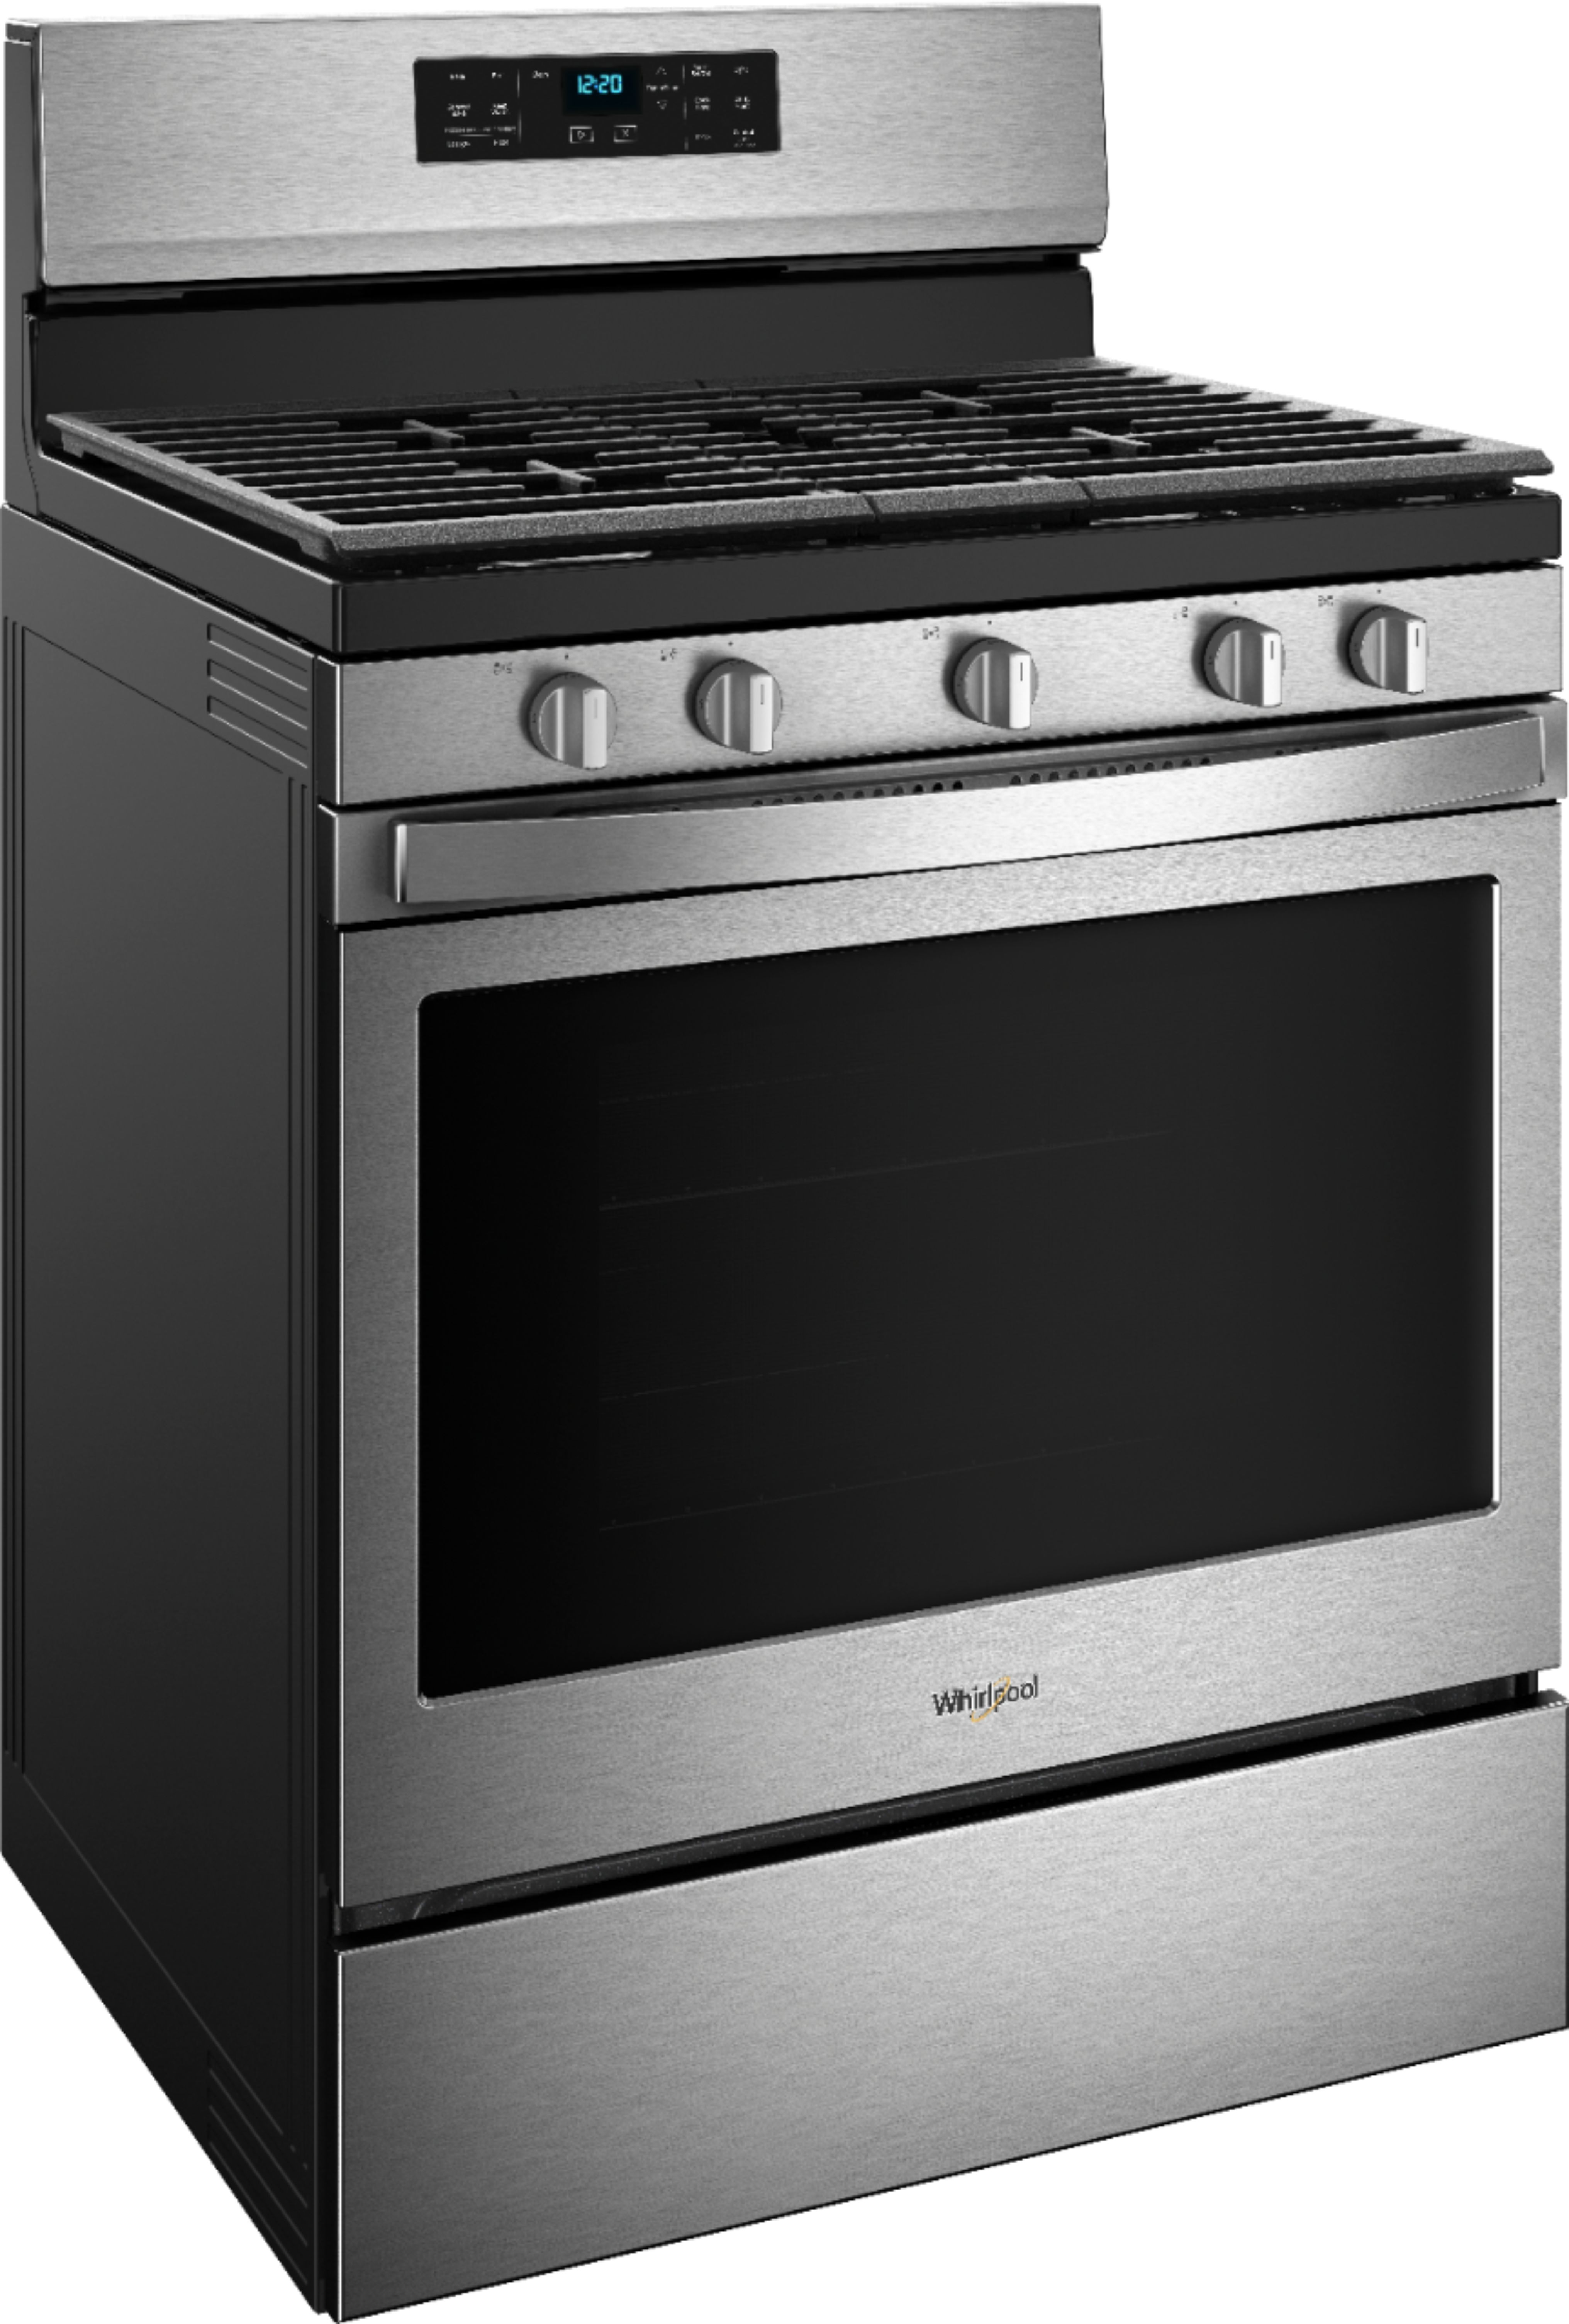 Angle View: KitchenAid - 5.8 Cu. Ft. Self-Cleaning Freestanding Gas True Convection Range with Even-Heat - Black stainless steel